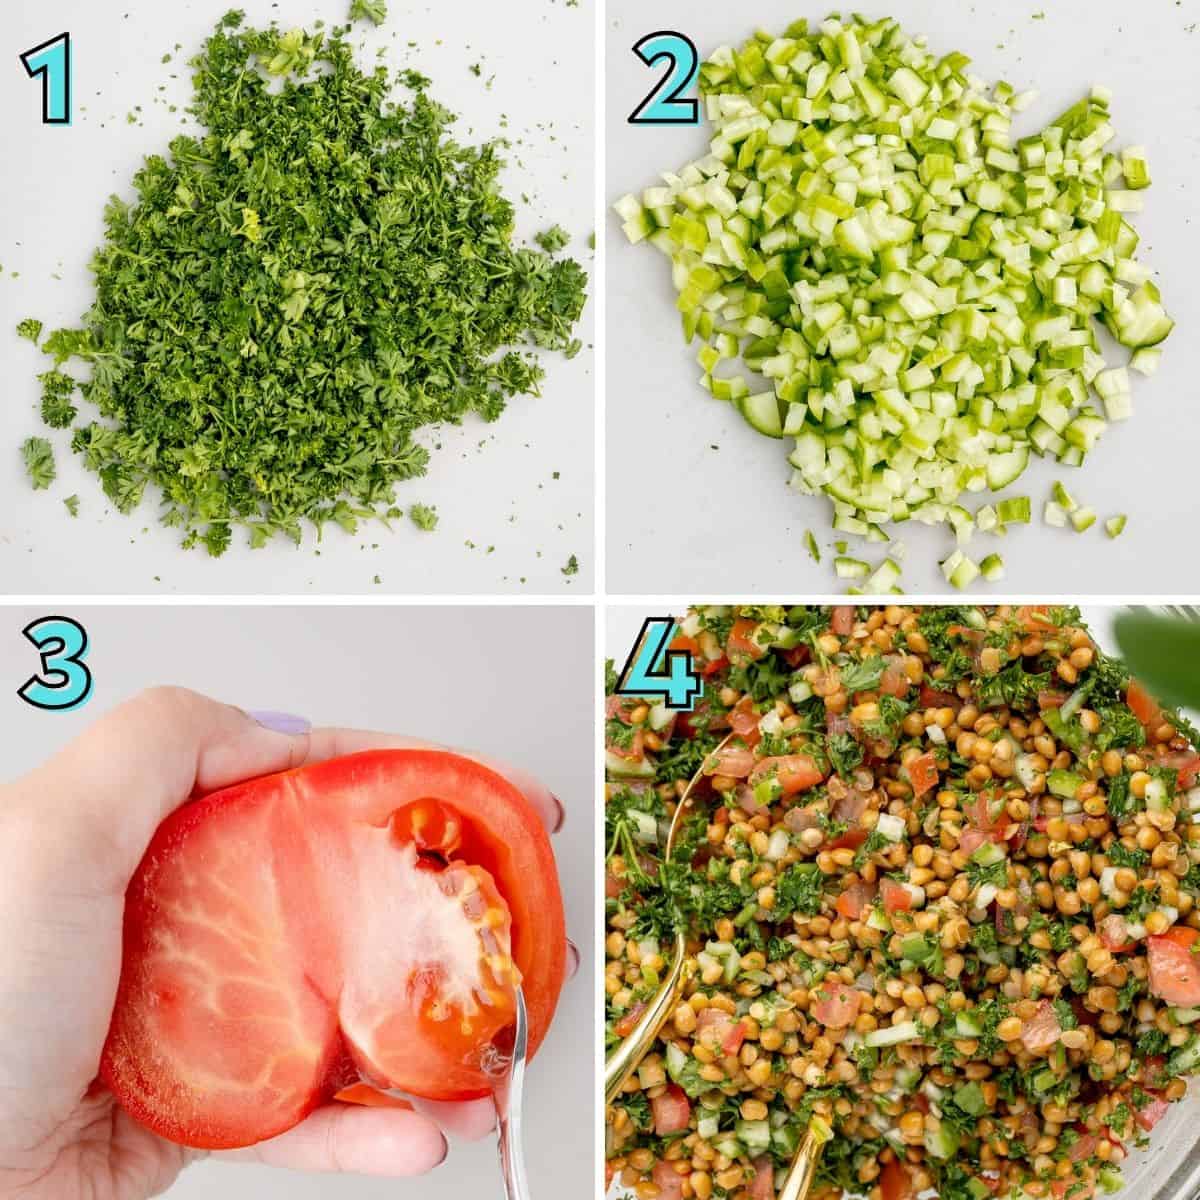 Step by step instructions to prepare lentil tabbouleh in a collage. 